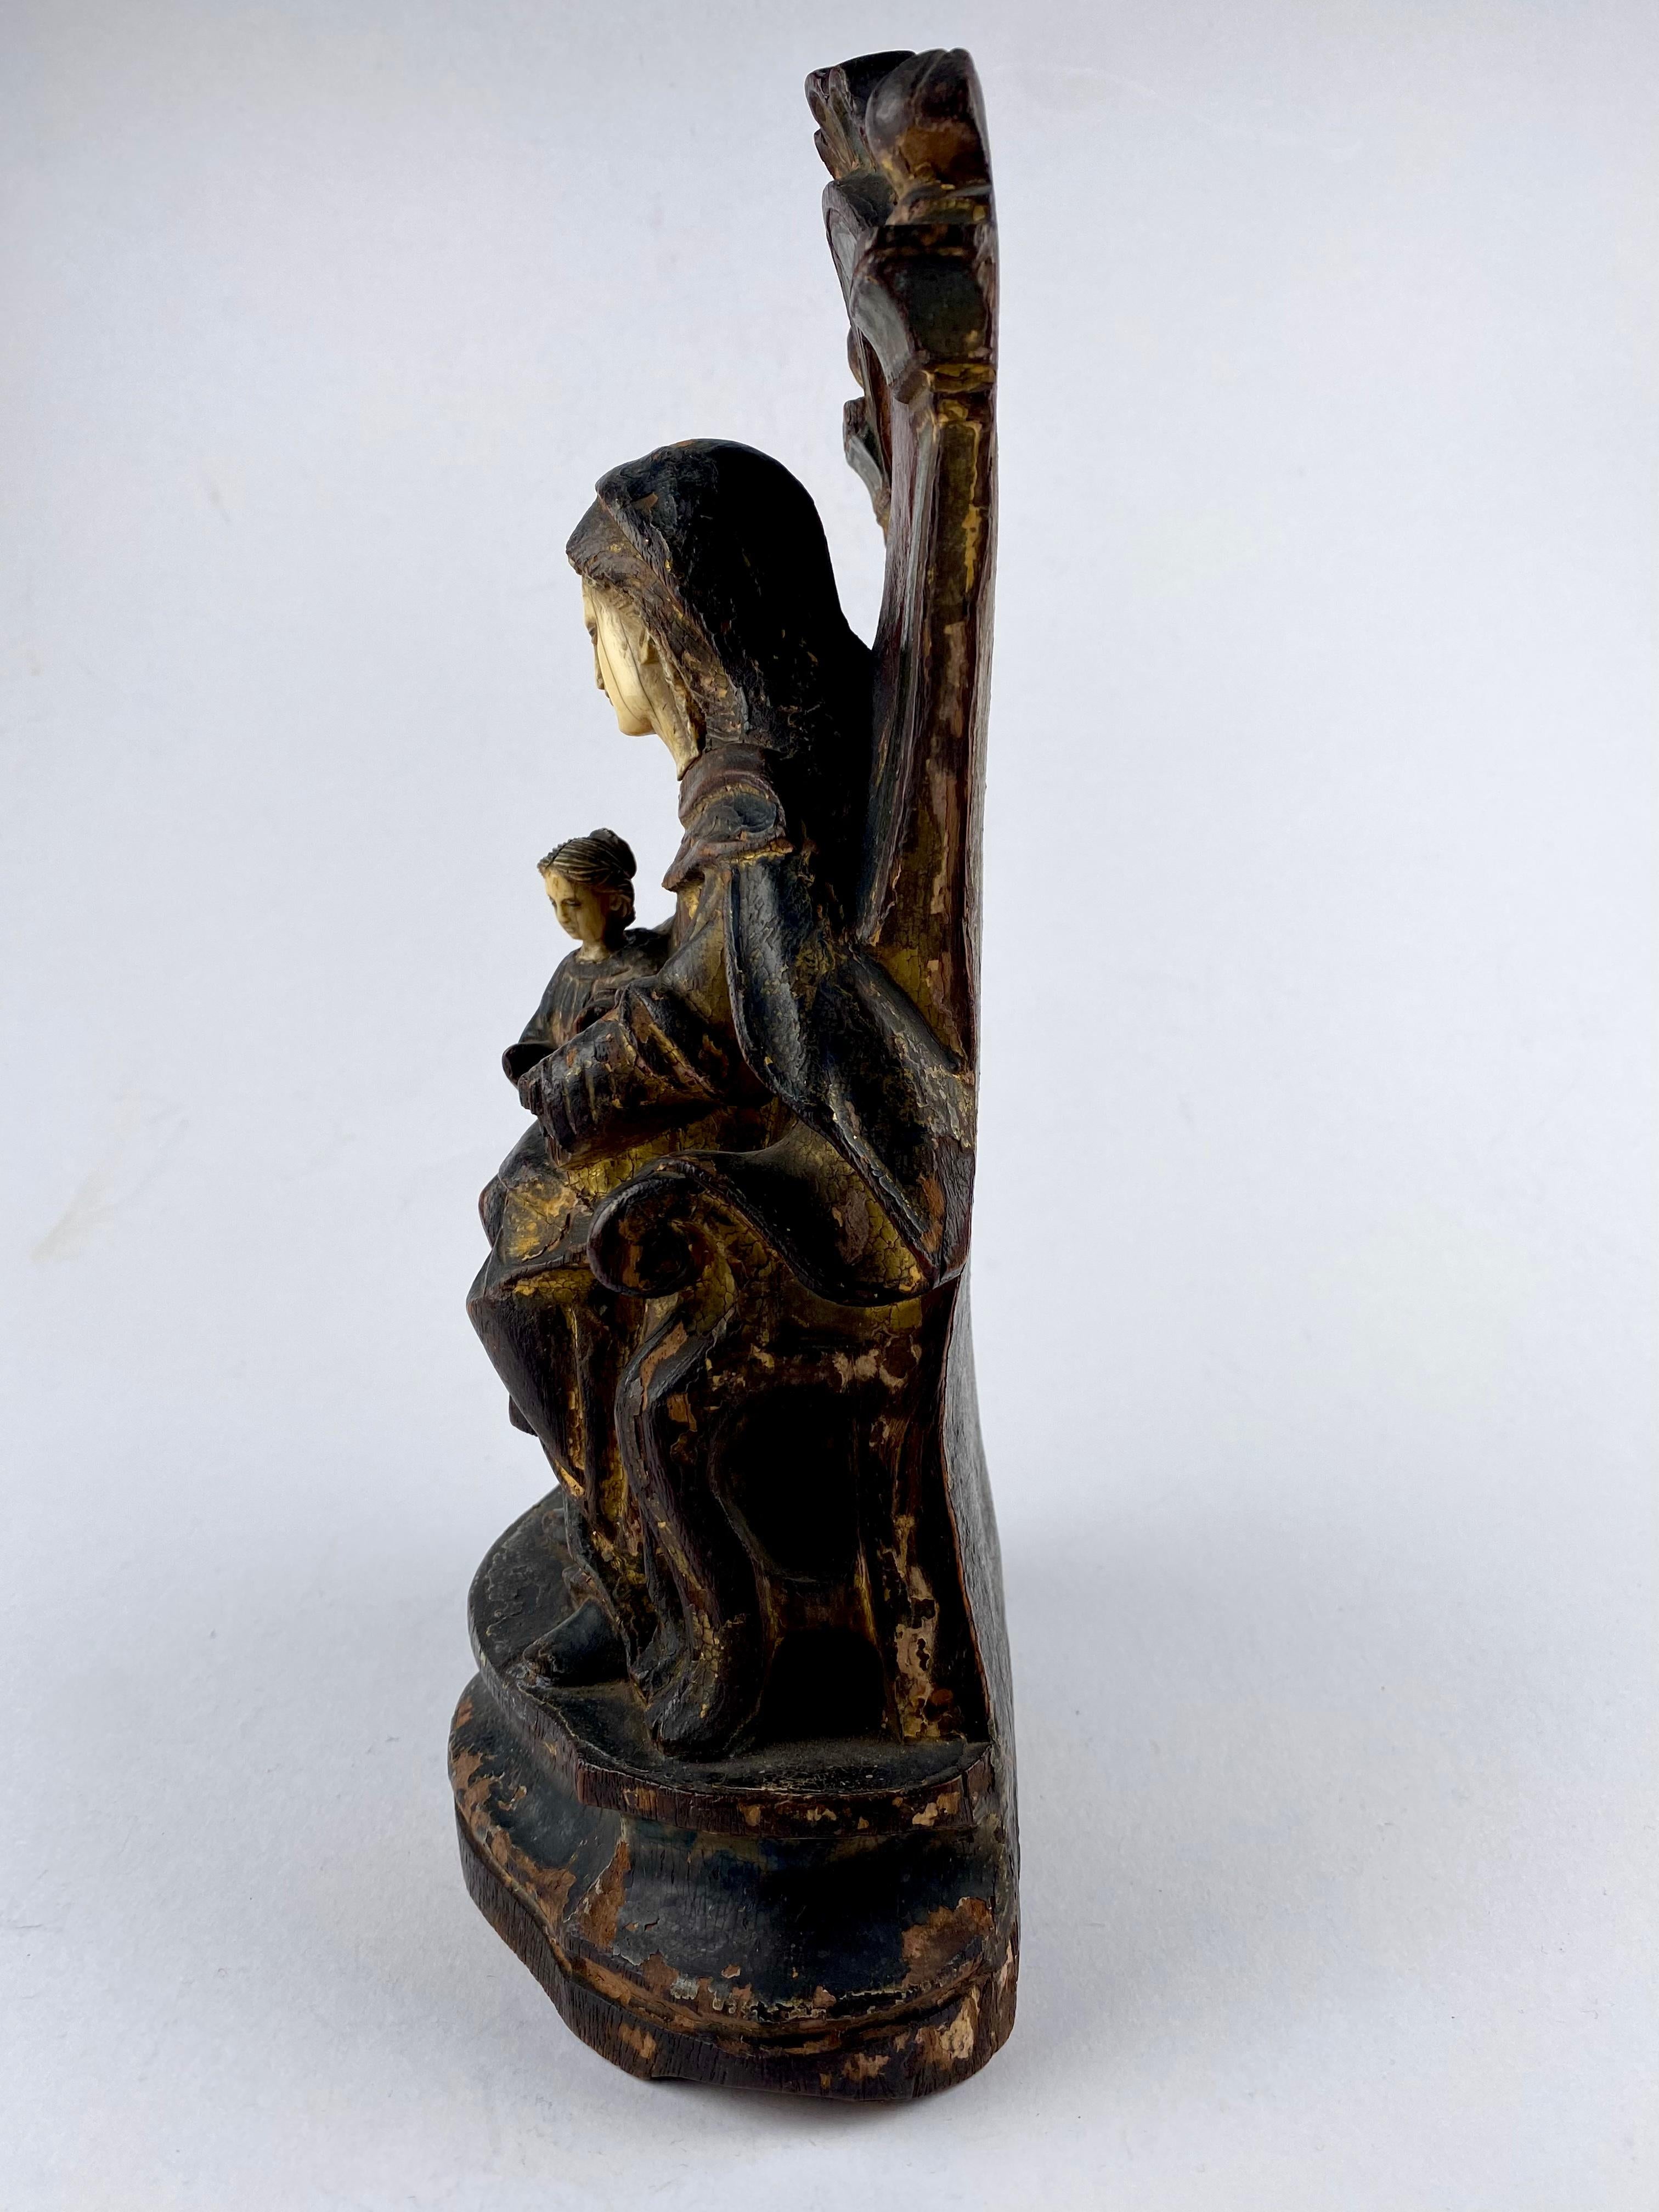 A very rare 18th century Indo Portuguese Religious Statue of Our Lady, Saint Anne the grandmother of Jesus.
Sculpted in India for the Portuguese market in wood with polychrome detailing 
Saint Anne is missing one hand and Mary is missing both of